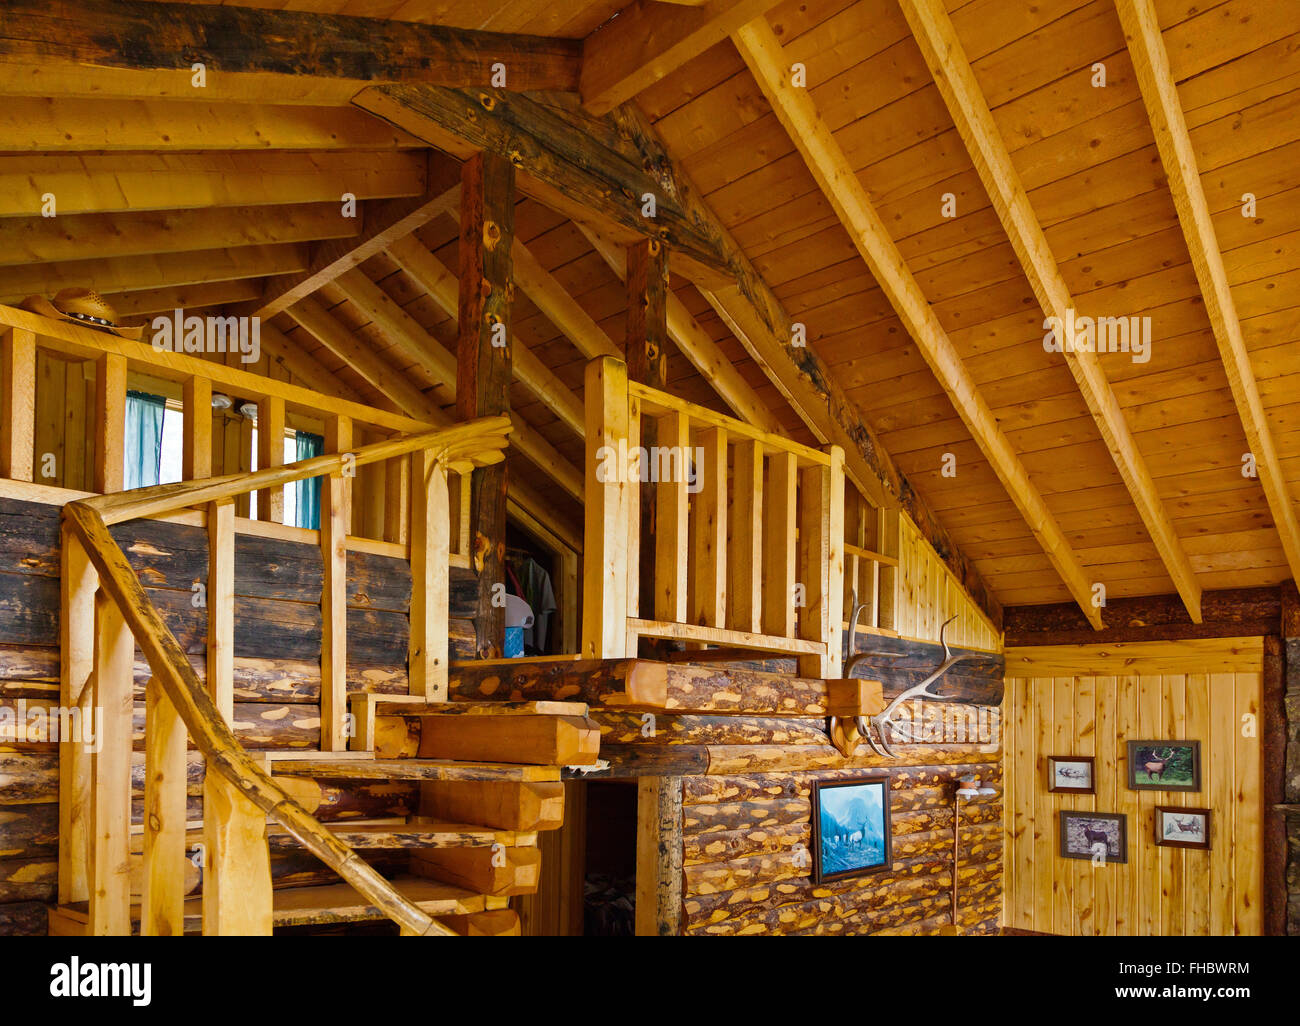 VACATIONERS enjoy a rustic yet comfortable cabin at OLEO RANCH at 10500 feet - SOUTHERN COLORADO MR Stock Photo